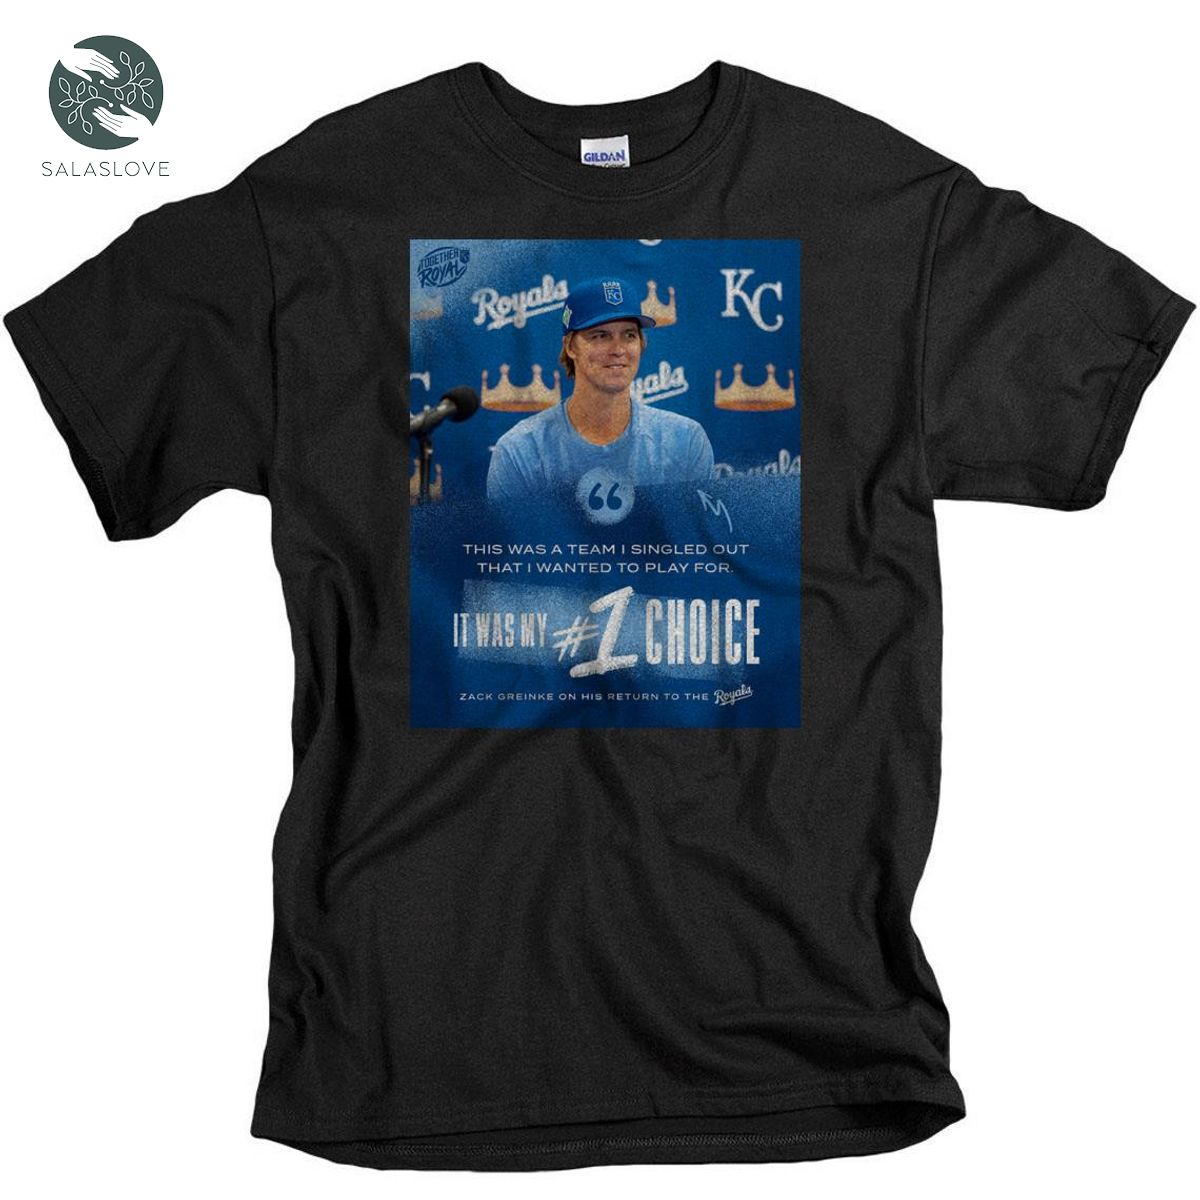 Zack Greinke Excited To Return To Royals T-shirt